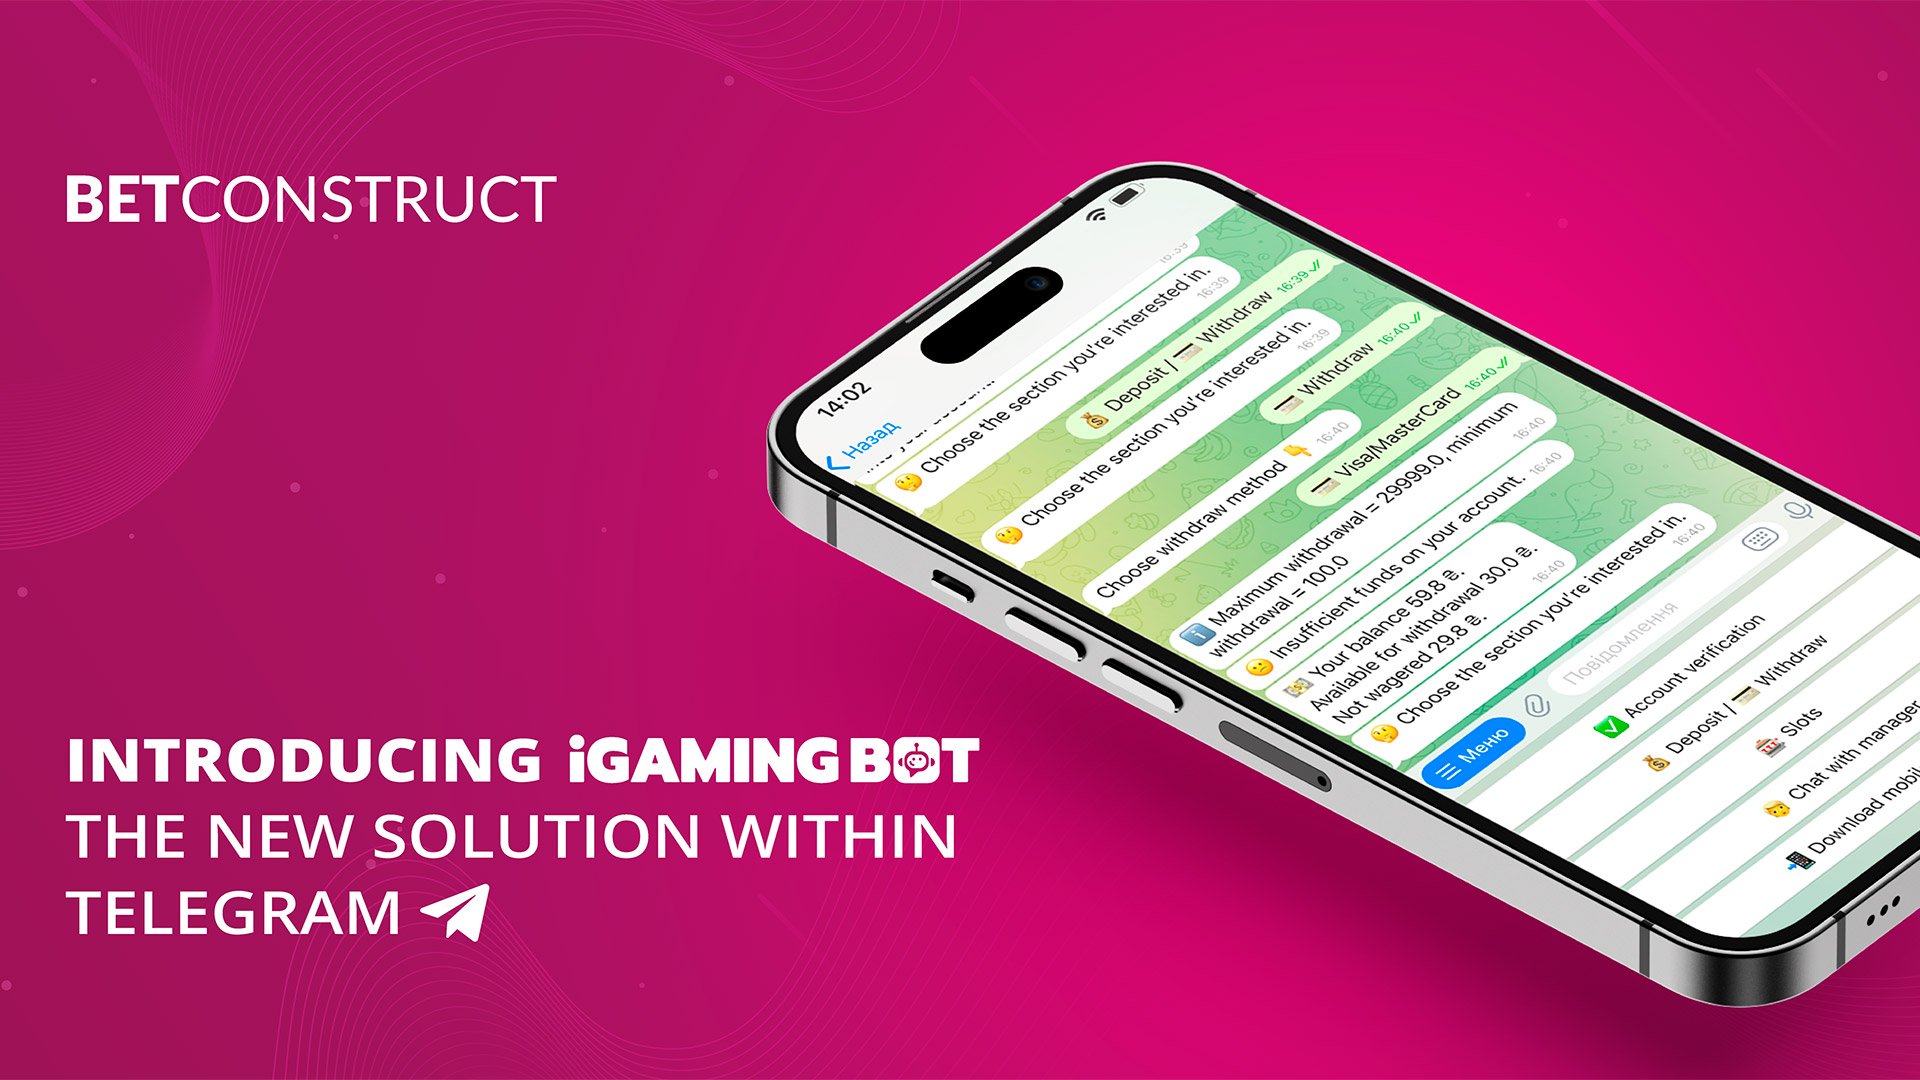 BetConstruct introduces iGaming Bot, a new application for Telegram